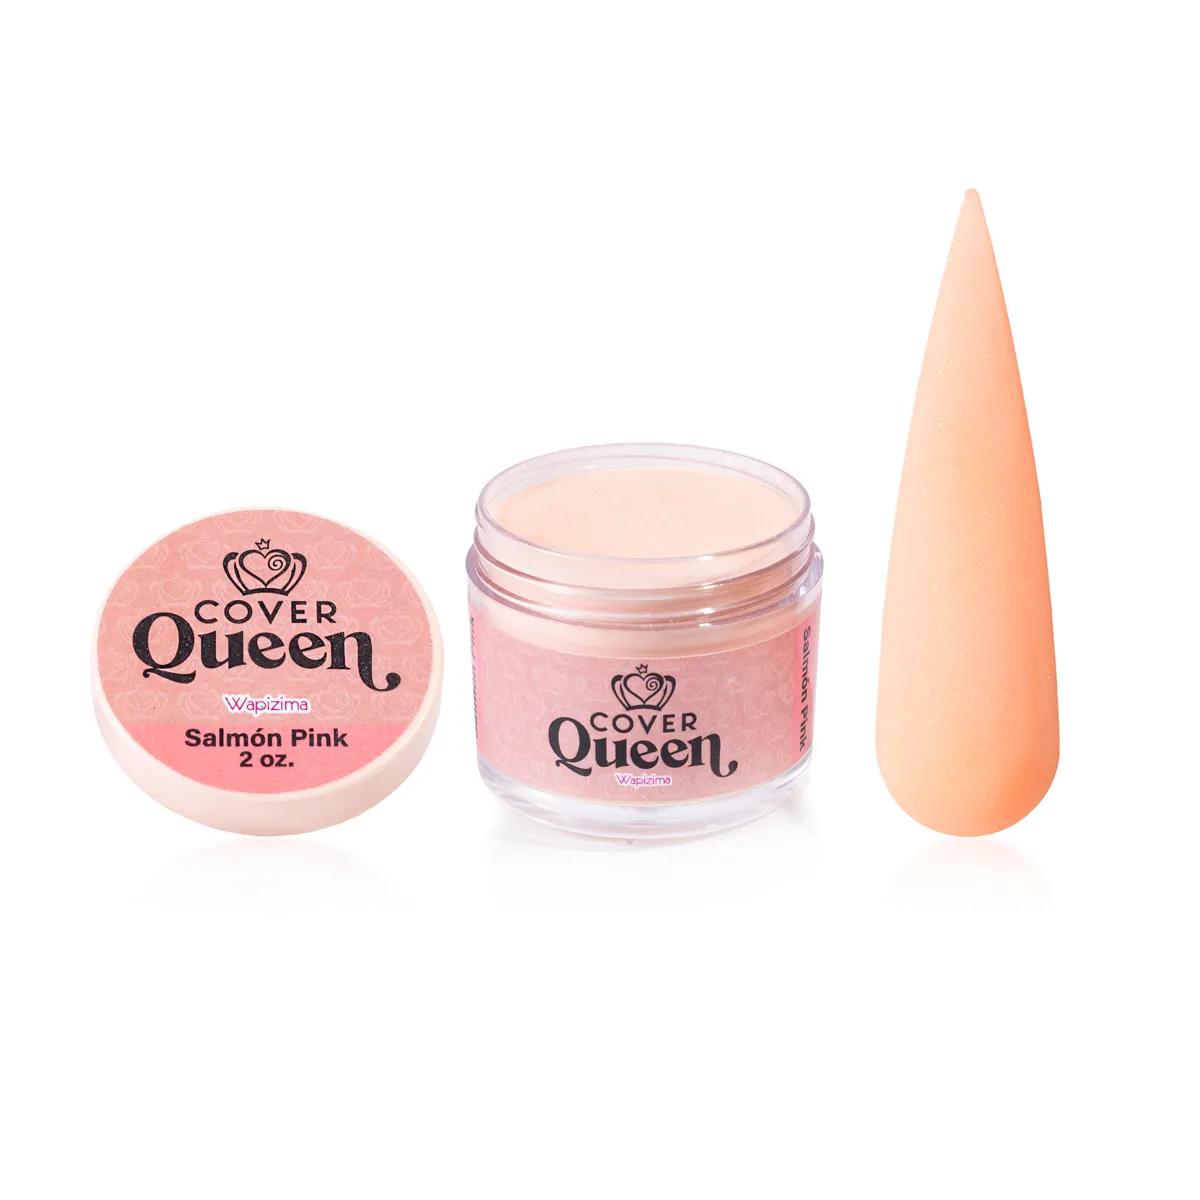 W.Cover Queen Salmon Pink 2 oz